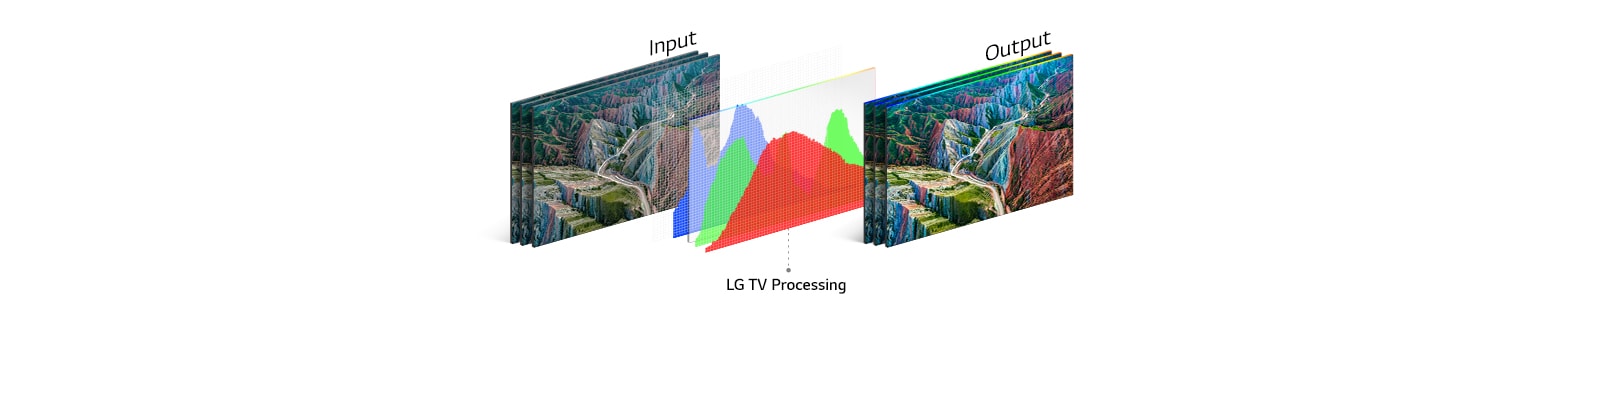 The structural process of HDR 10 Pro showing the output image after LG TV Processing the input image.